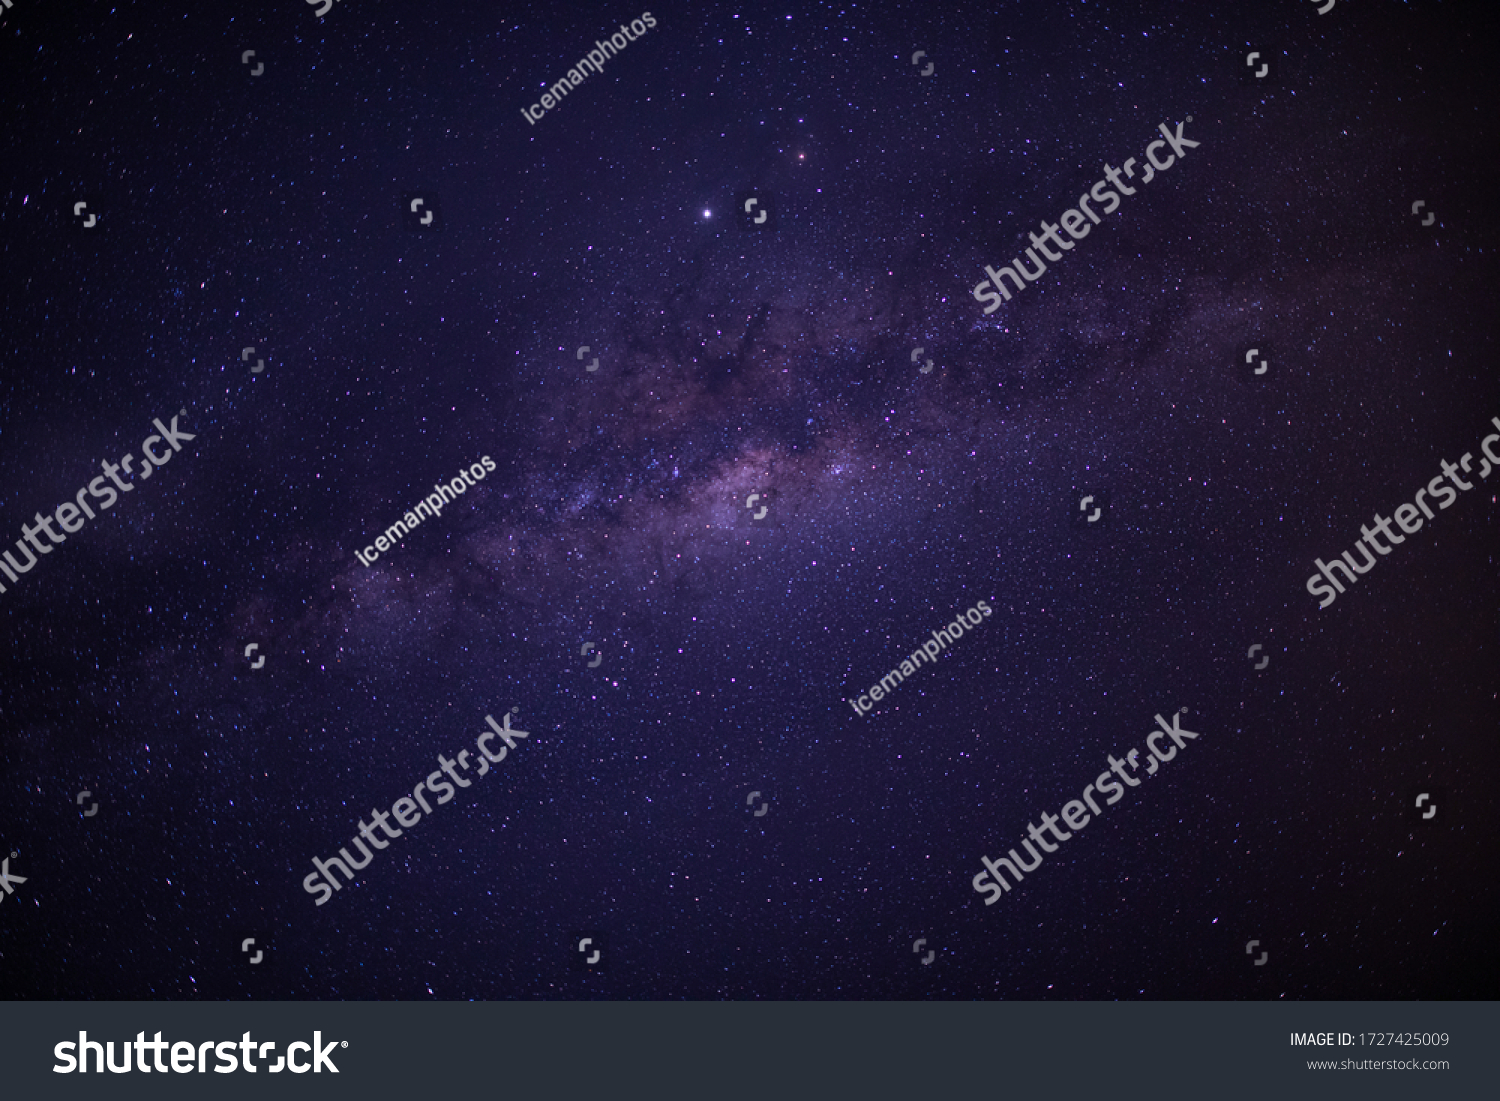 Panorama view universe space shot of milky way galaxy with stars on a night sky background. The Milky Way is the galaxy that contains our Solar System. #1727425009